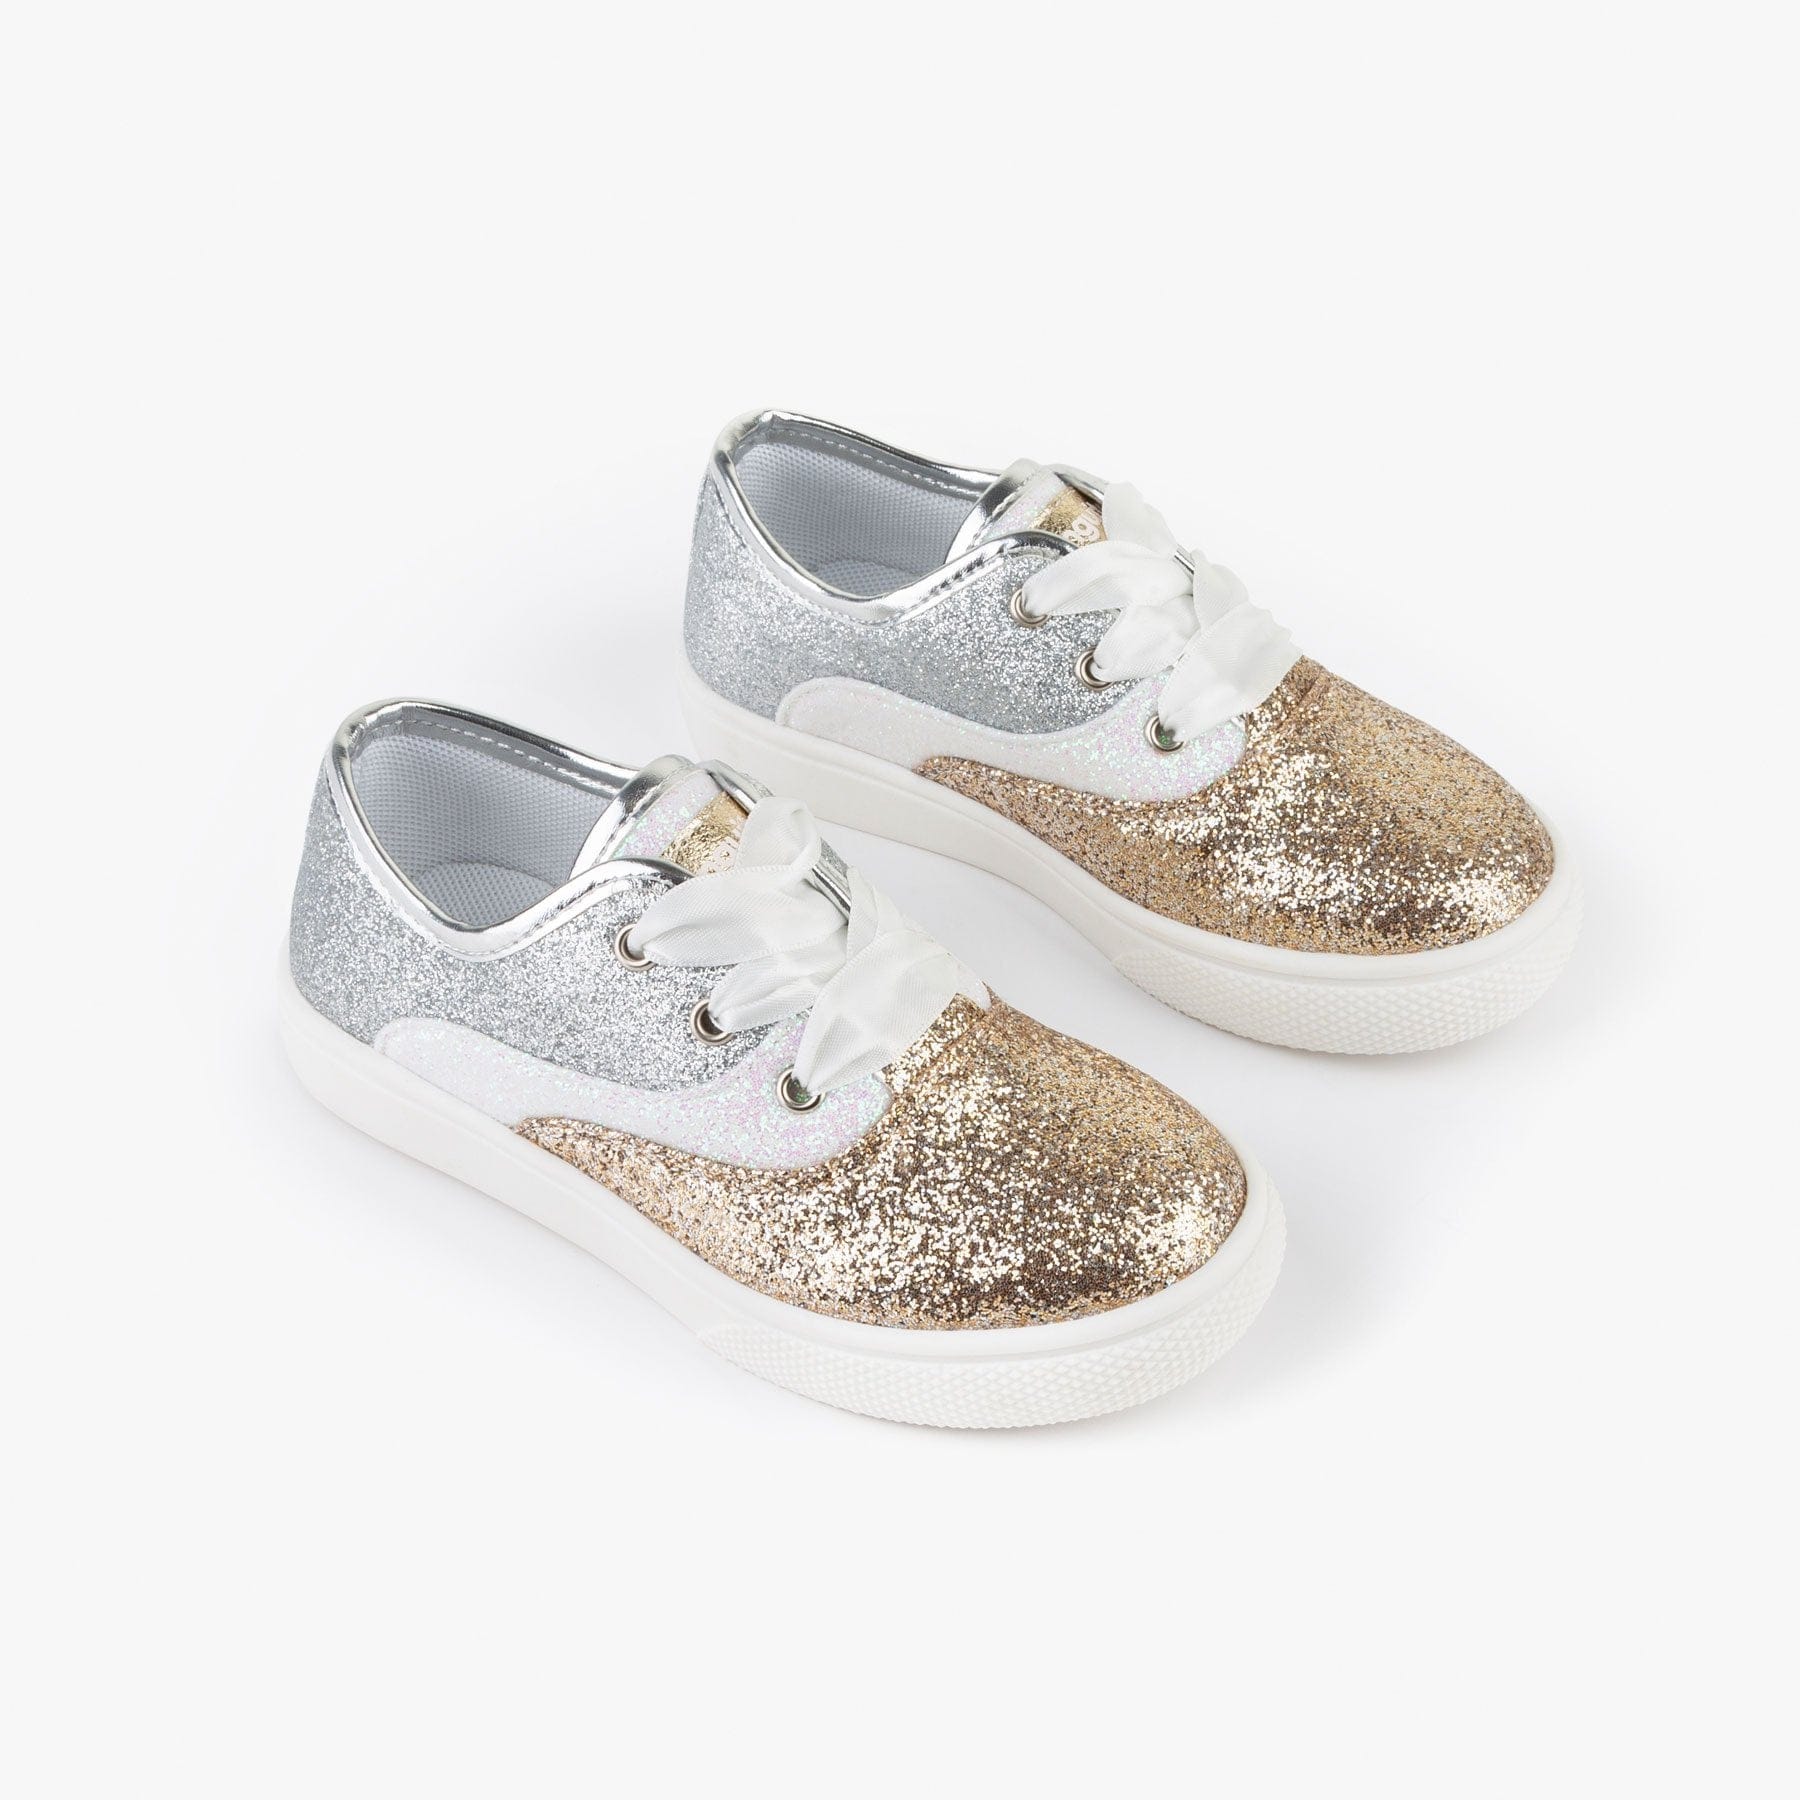 CONGUITOS Shoes Girl's Silver Platinum Glitter Sneakers